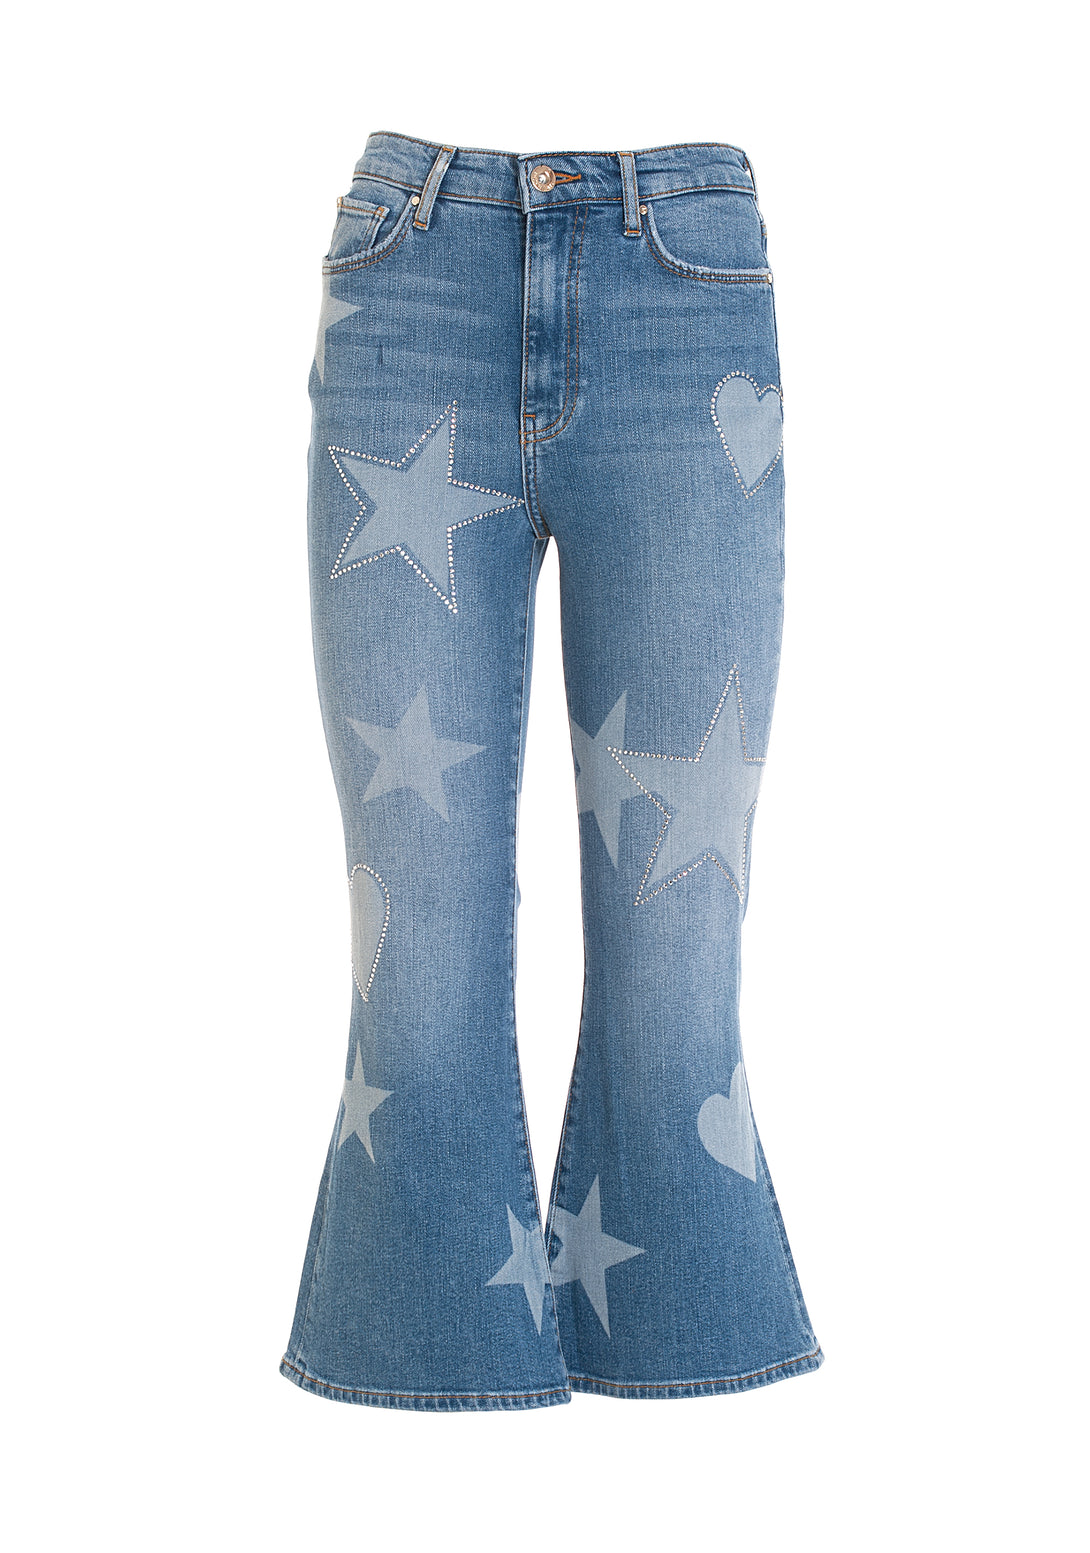 Jeans flare cropped made in denim with symbols pattern